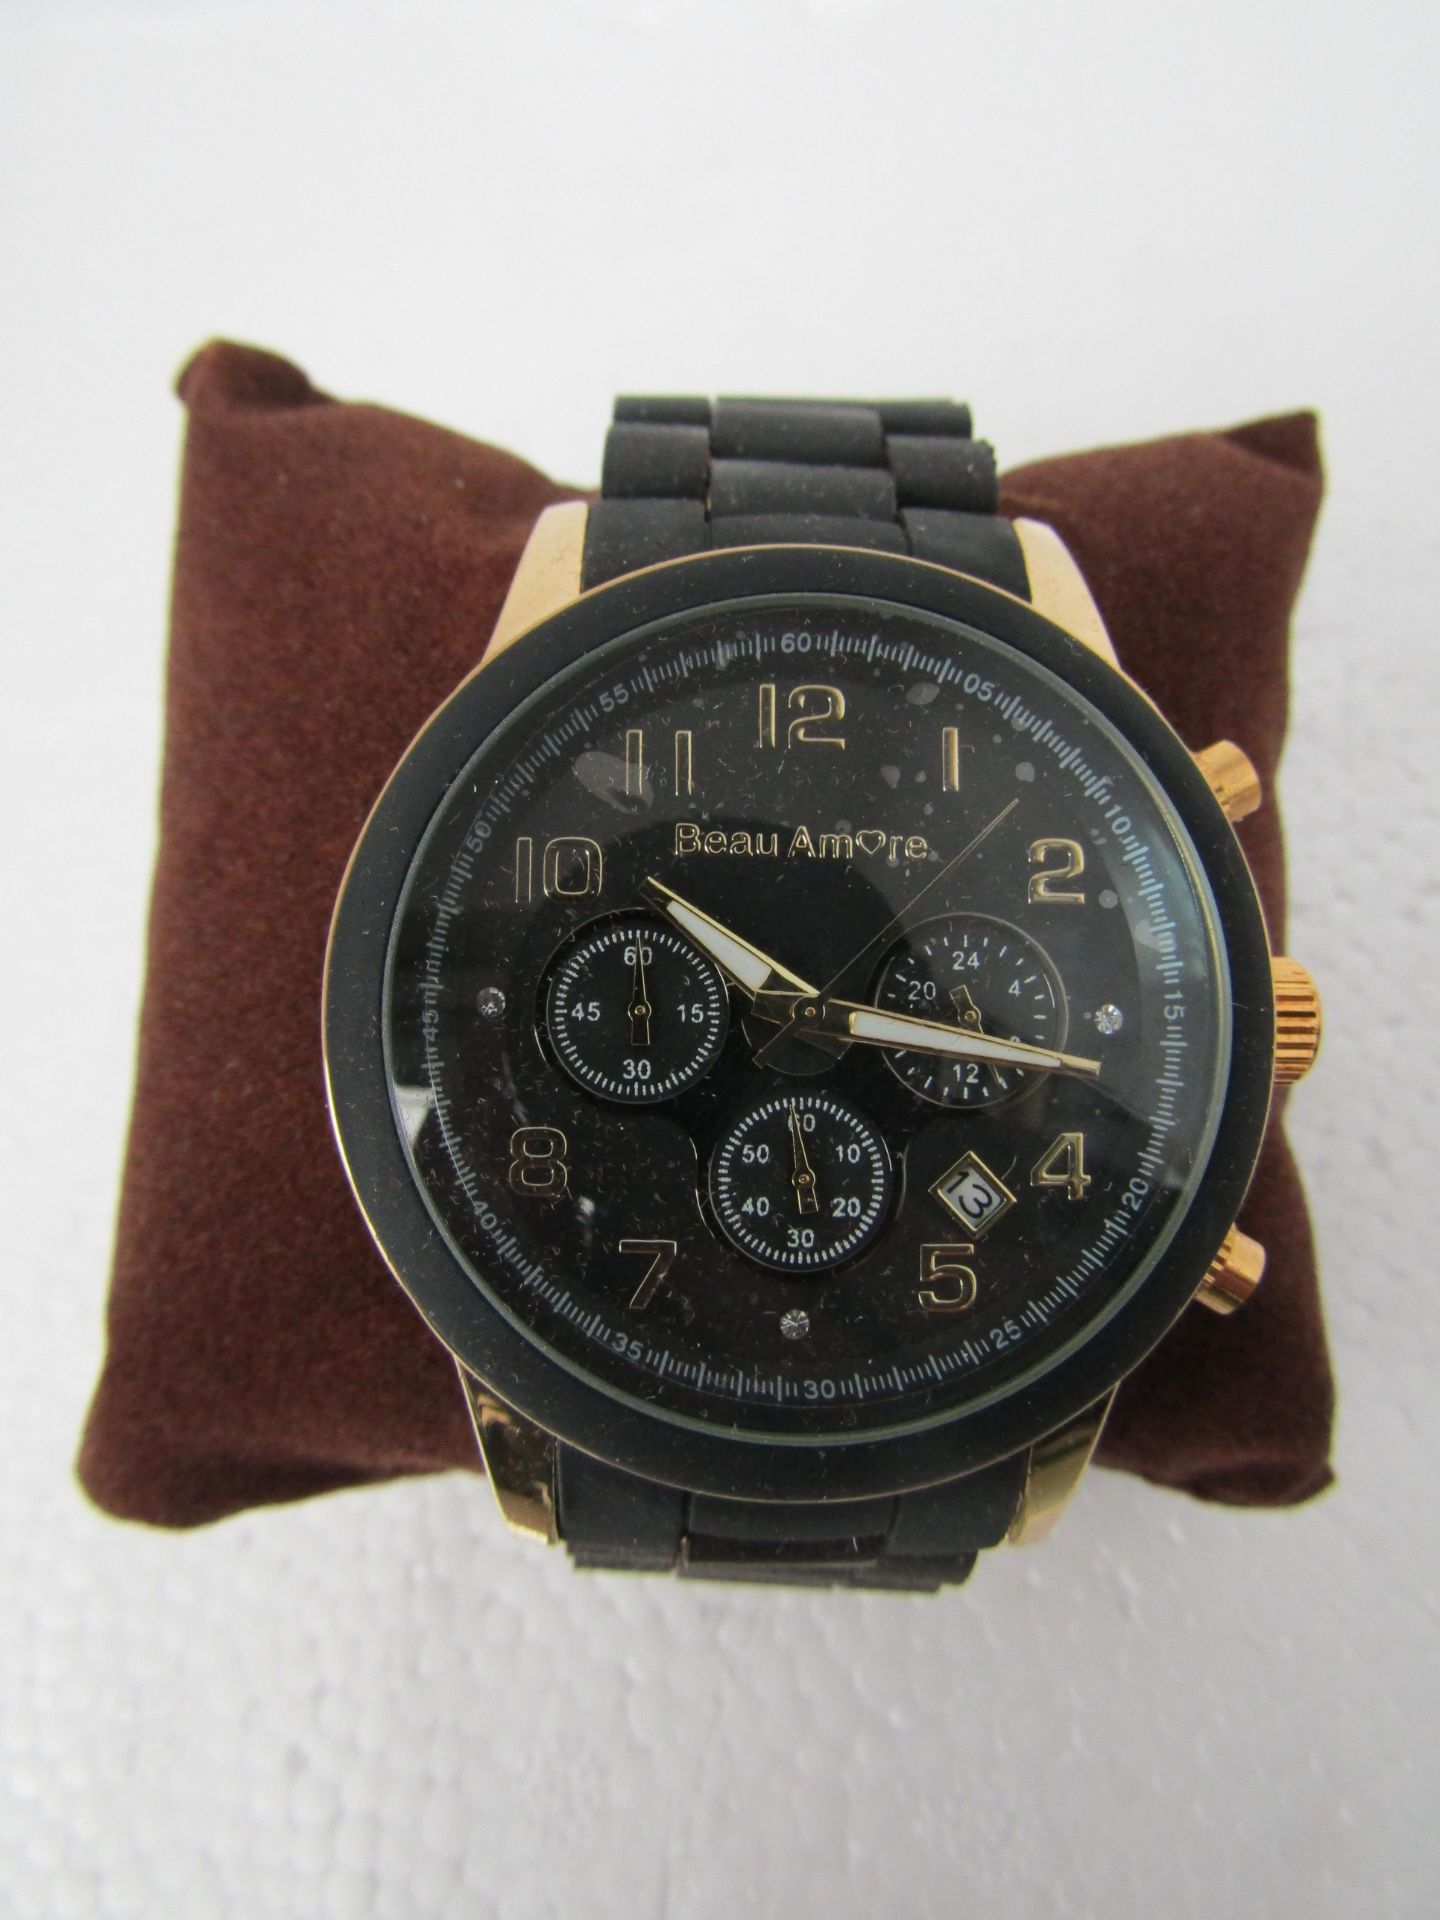 NO VAT! Beau Amore Black & Gold coloured watch new in presentation box, (in the style of the Classic